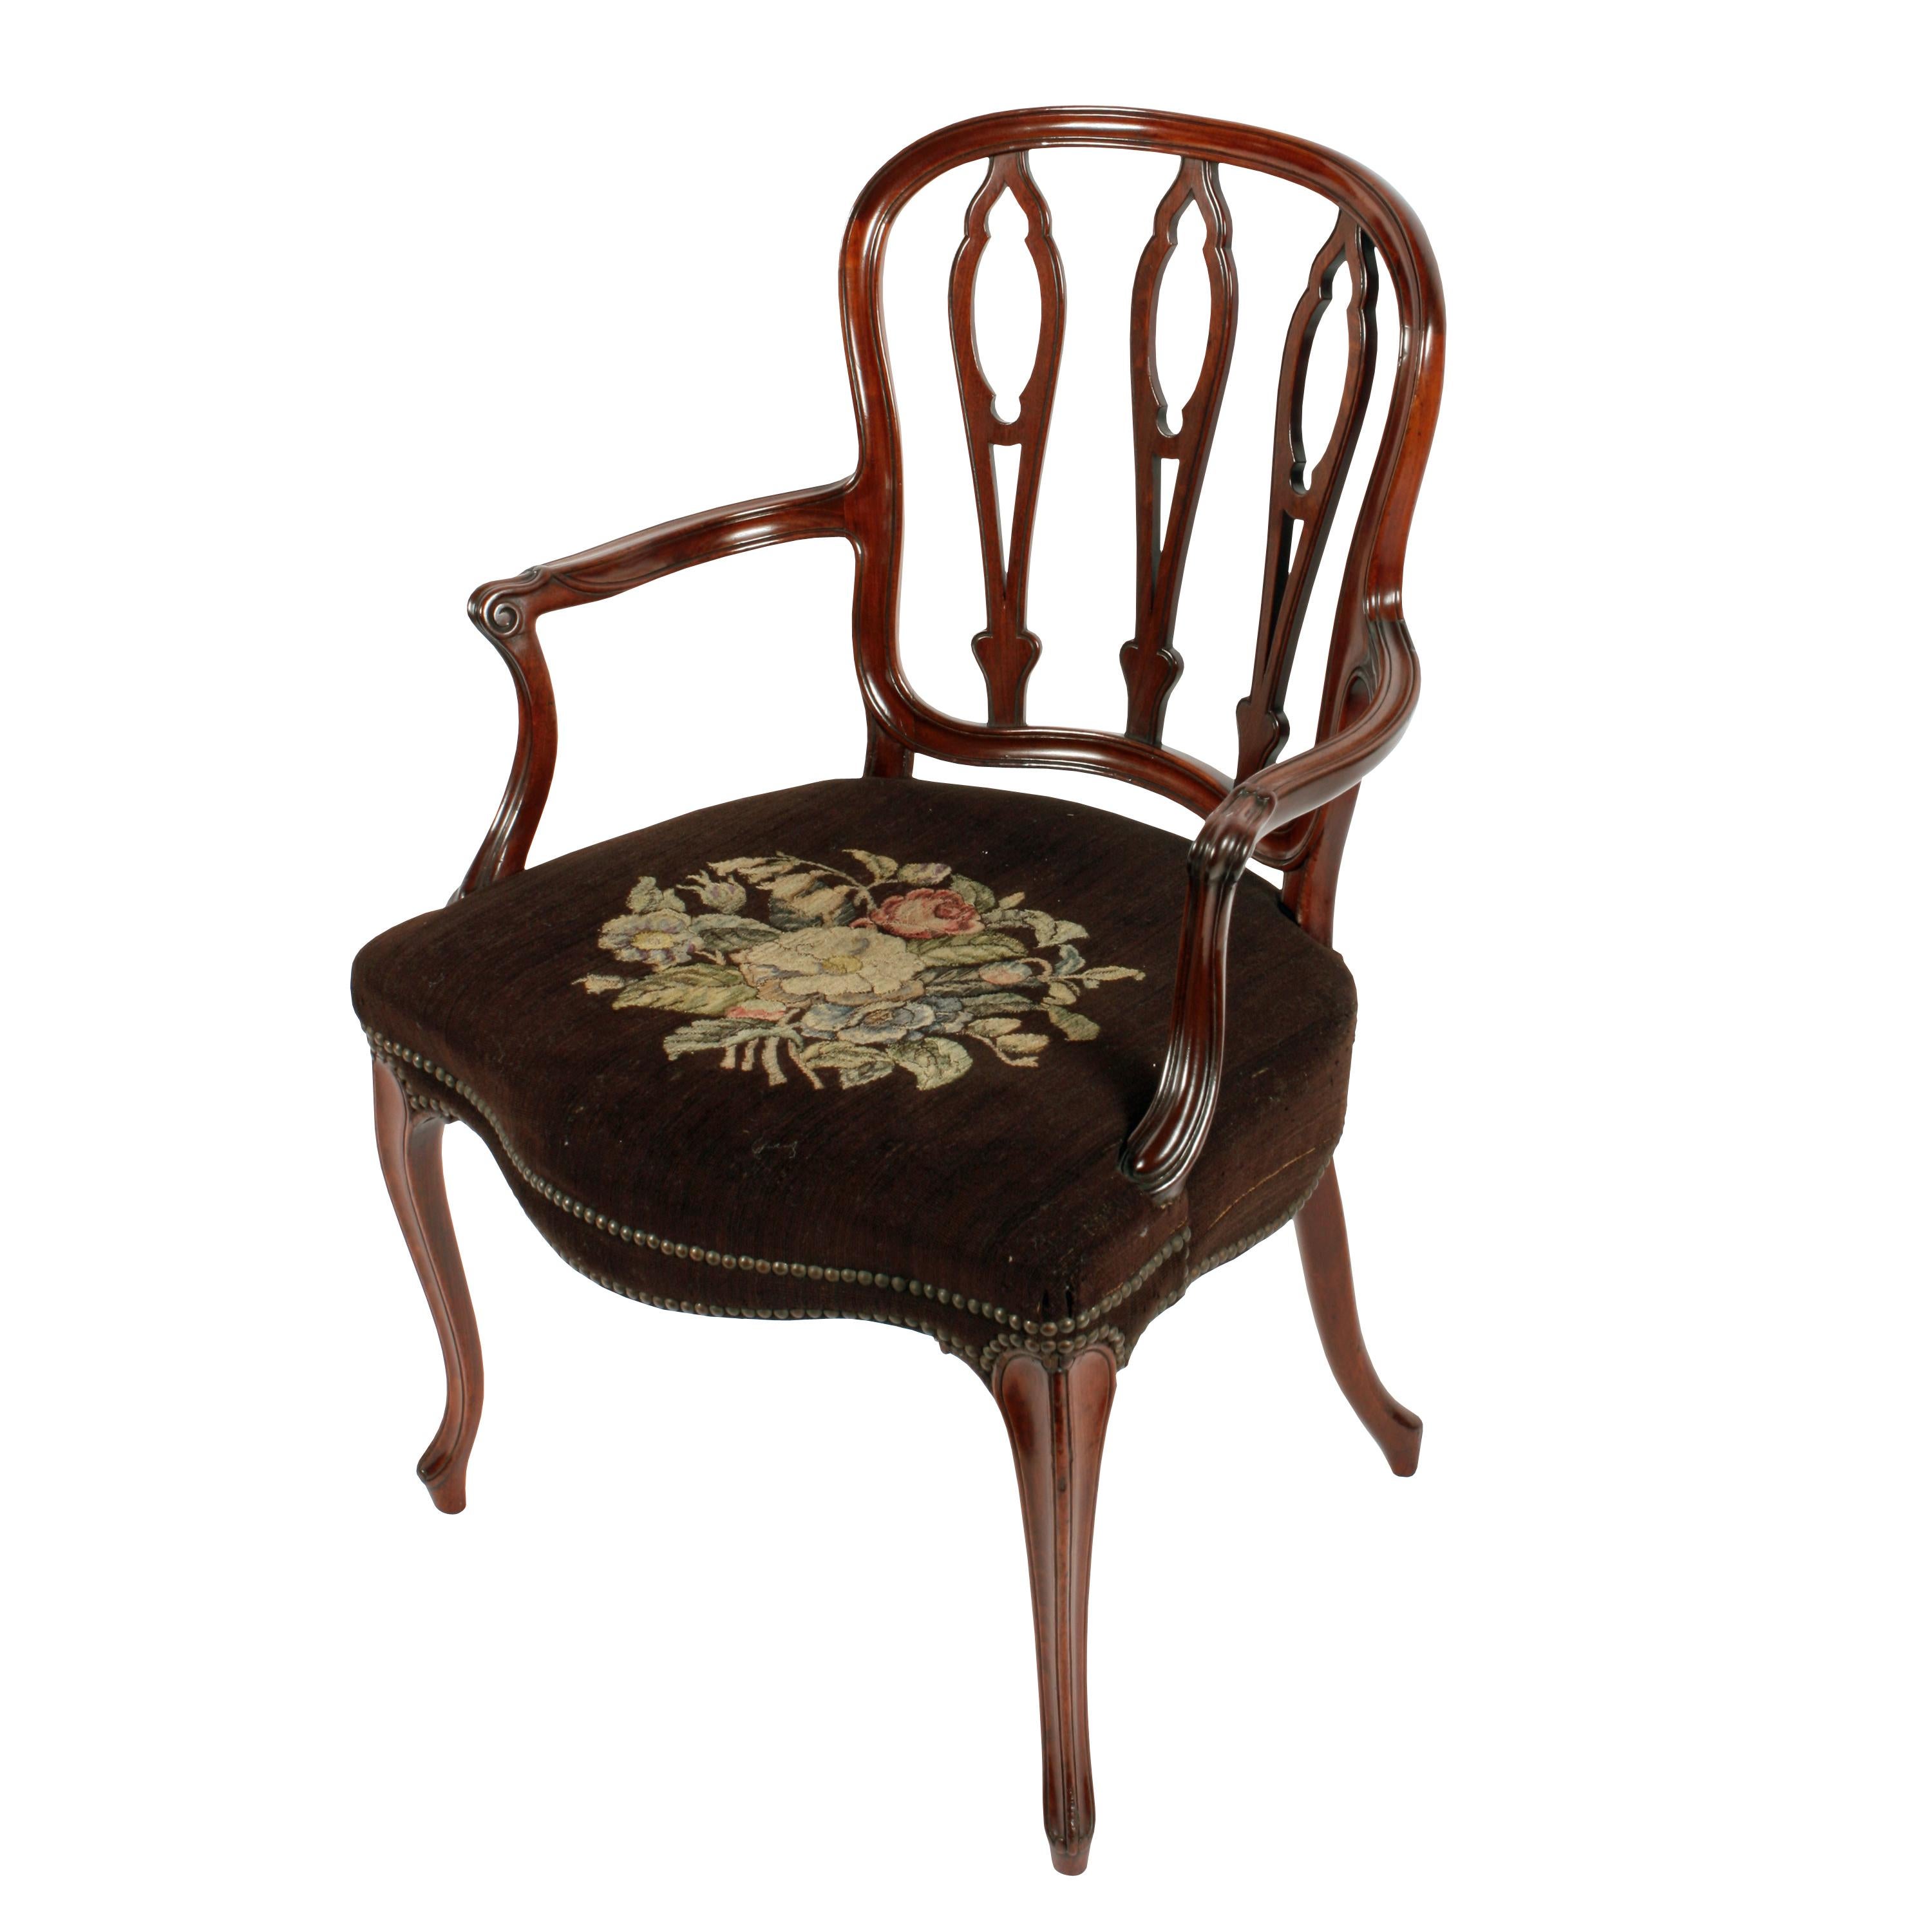 18th century French Hepplewhite armchair


An 18th century George III mahogany French Hepplewhite armchair.

The chair has a broad upholstered seat with a serpentine front and carved cabriole shaped legs.

The back has three pierced splats,